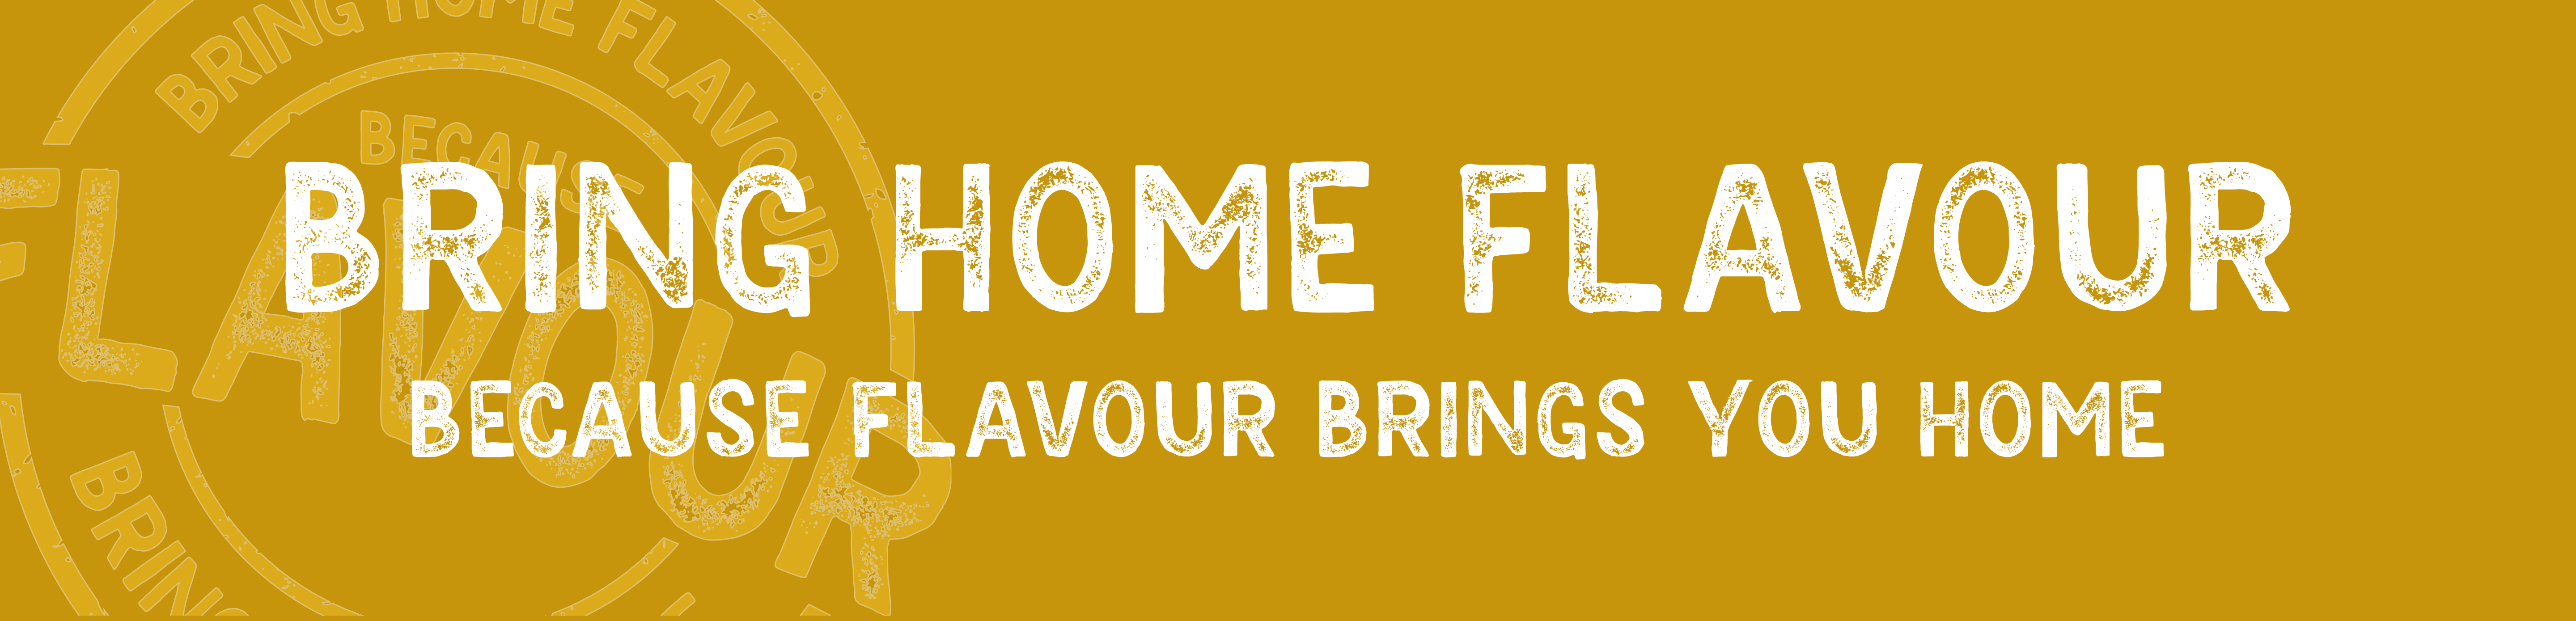 Bring home flavour because flavour brings you home